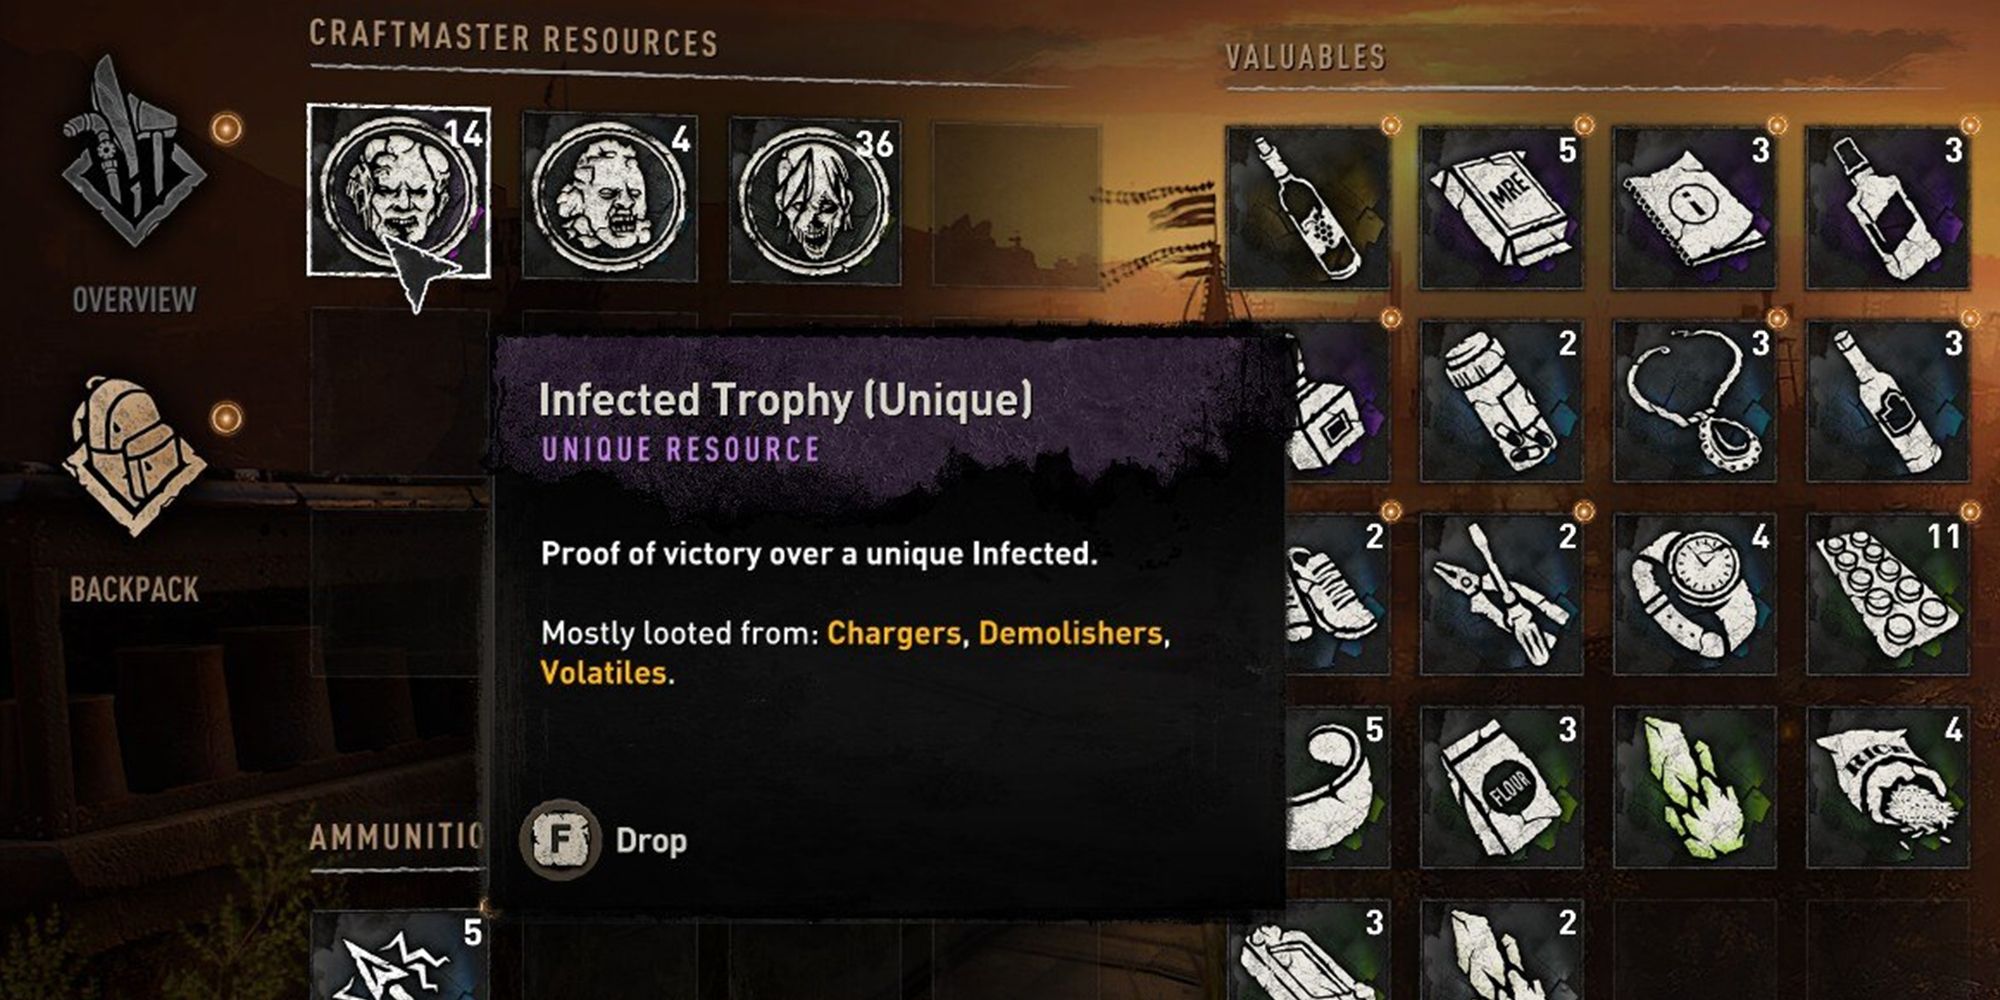 Dying Light 2 - Highlighting The Backpack Menu Showing The Different Infected Trophies